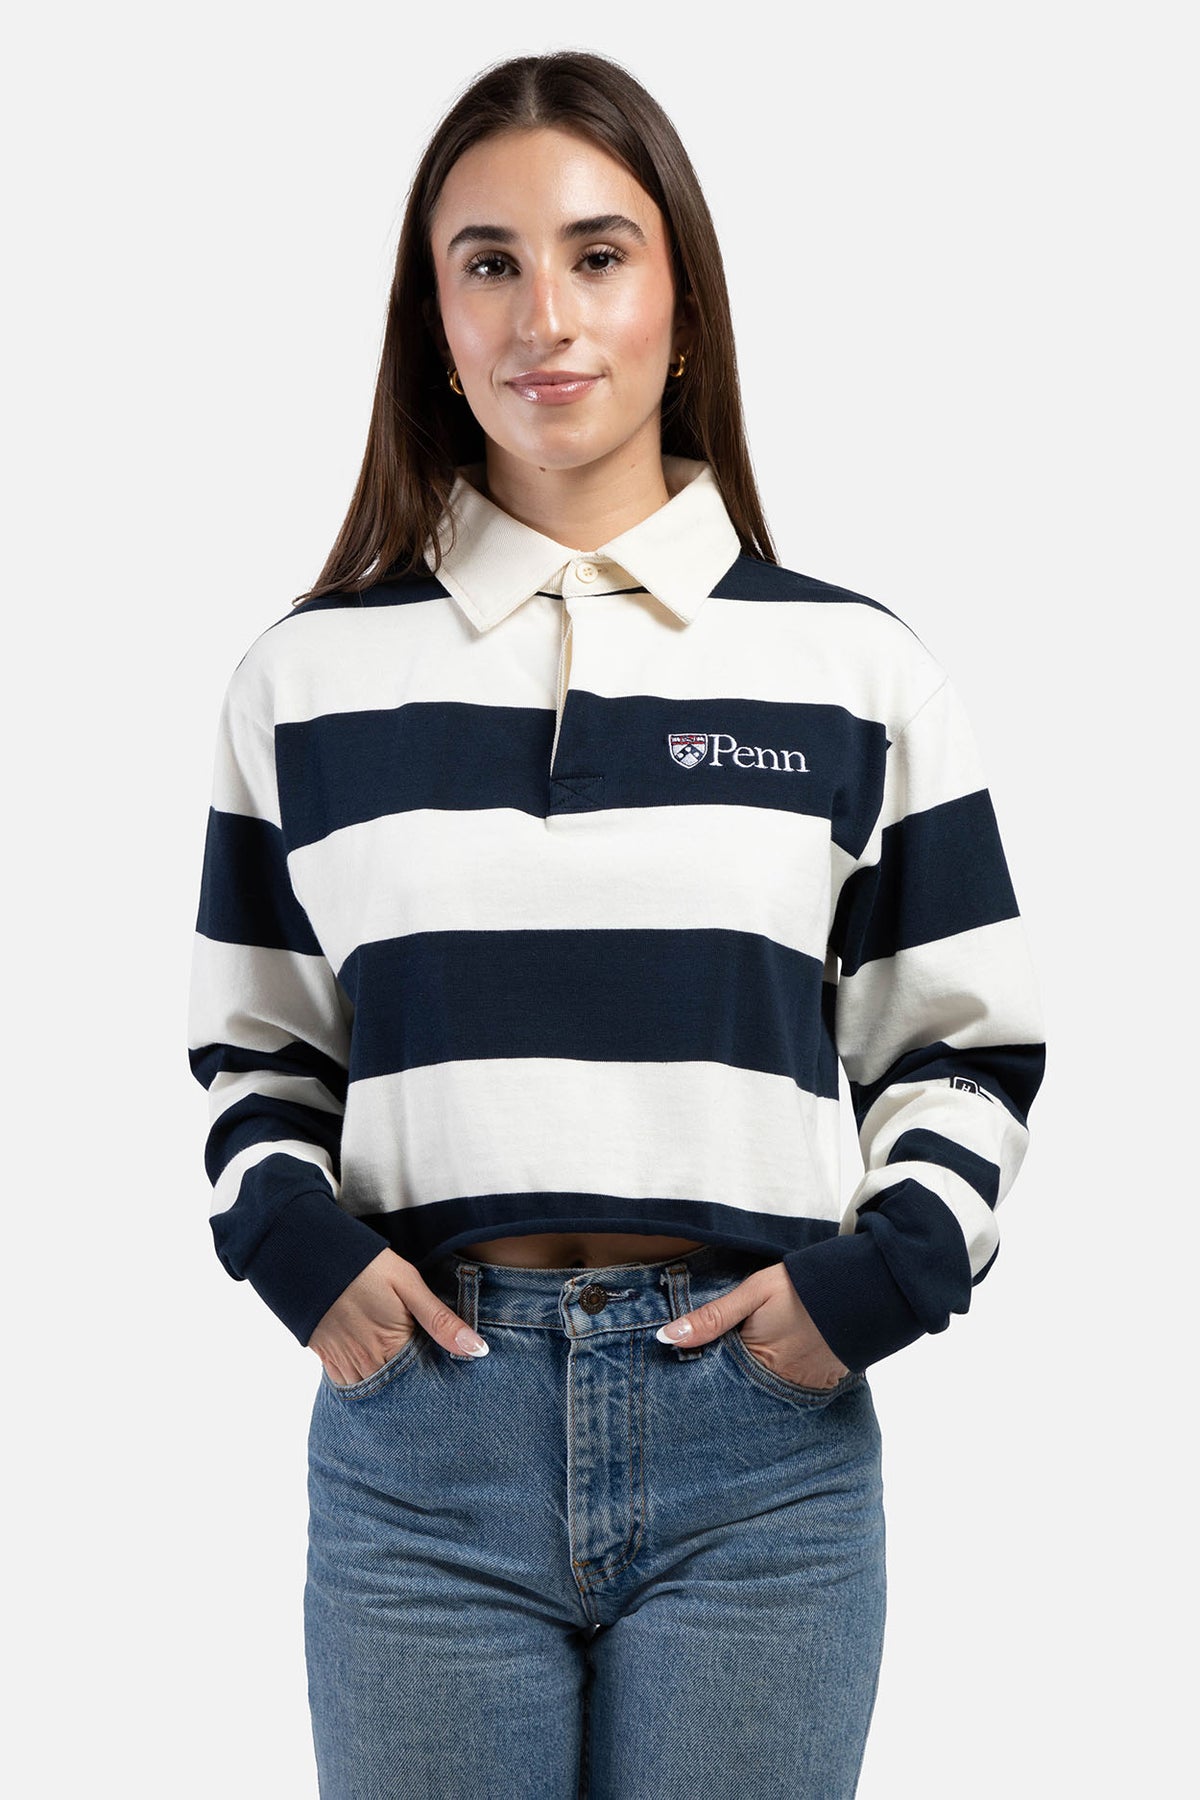 UPenn Rugby Top